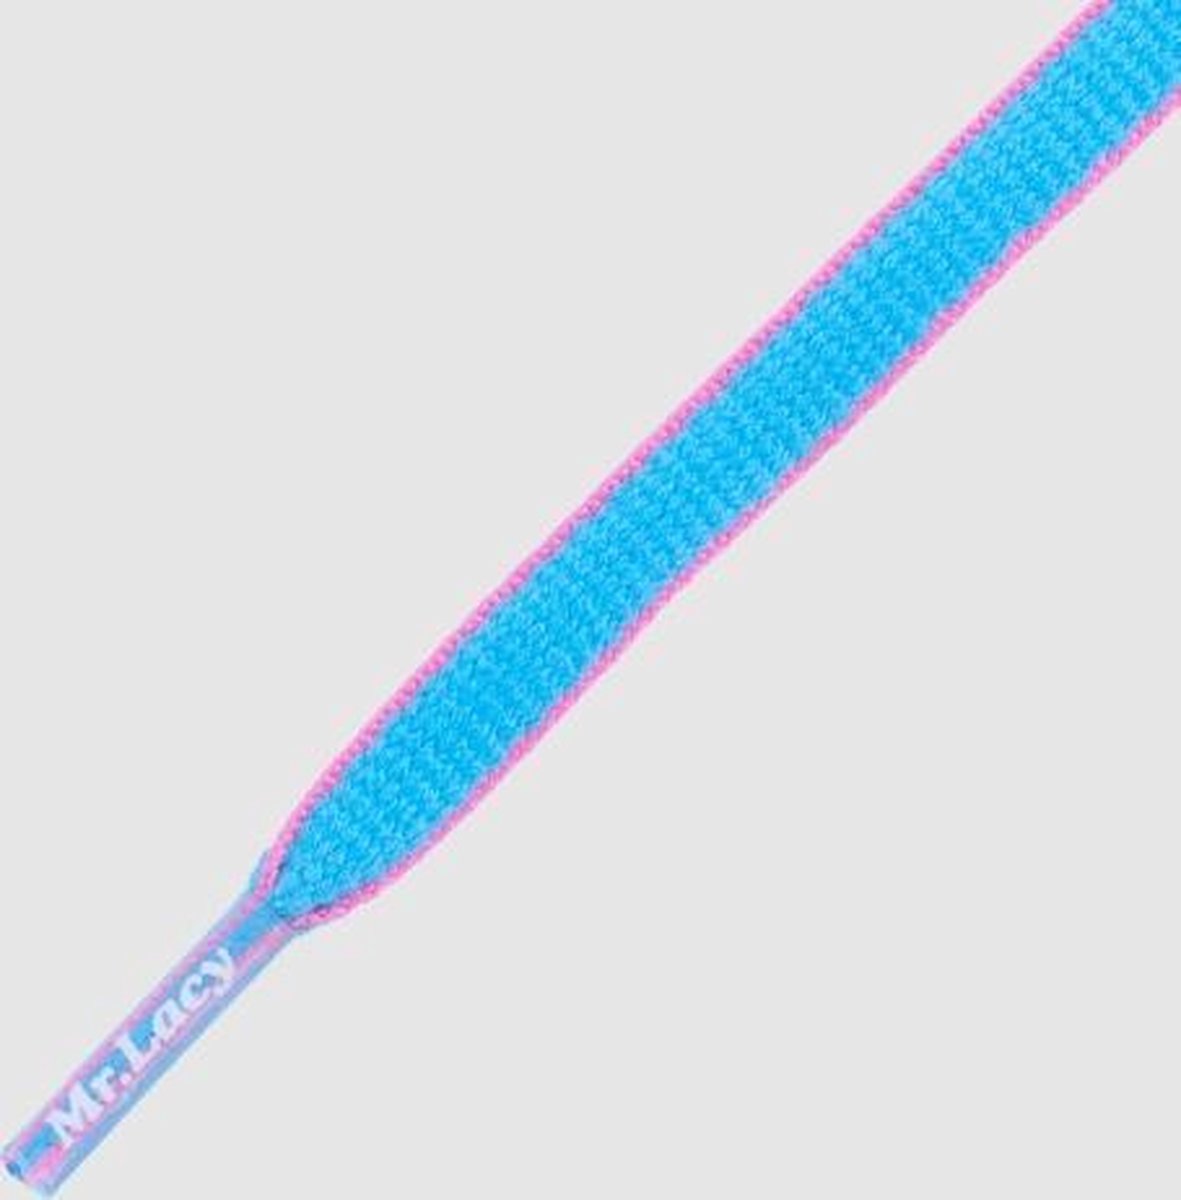 8 mm x 130 cm Ovaal Blauw Roze - Slimmies Two Tone Mr.Lacy veters